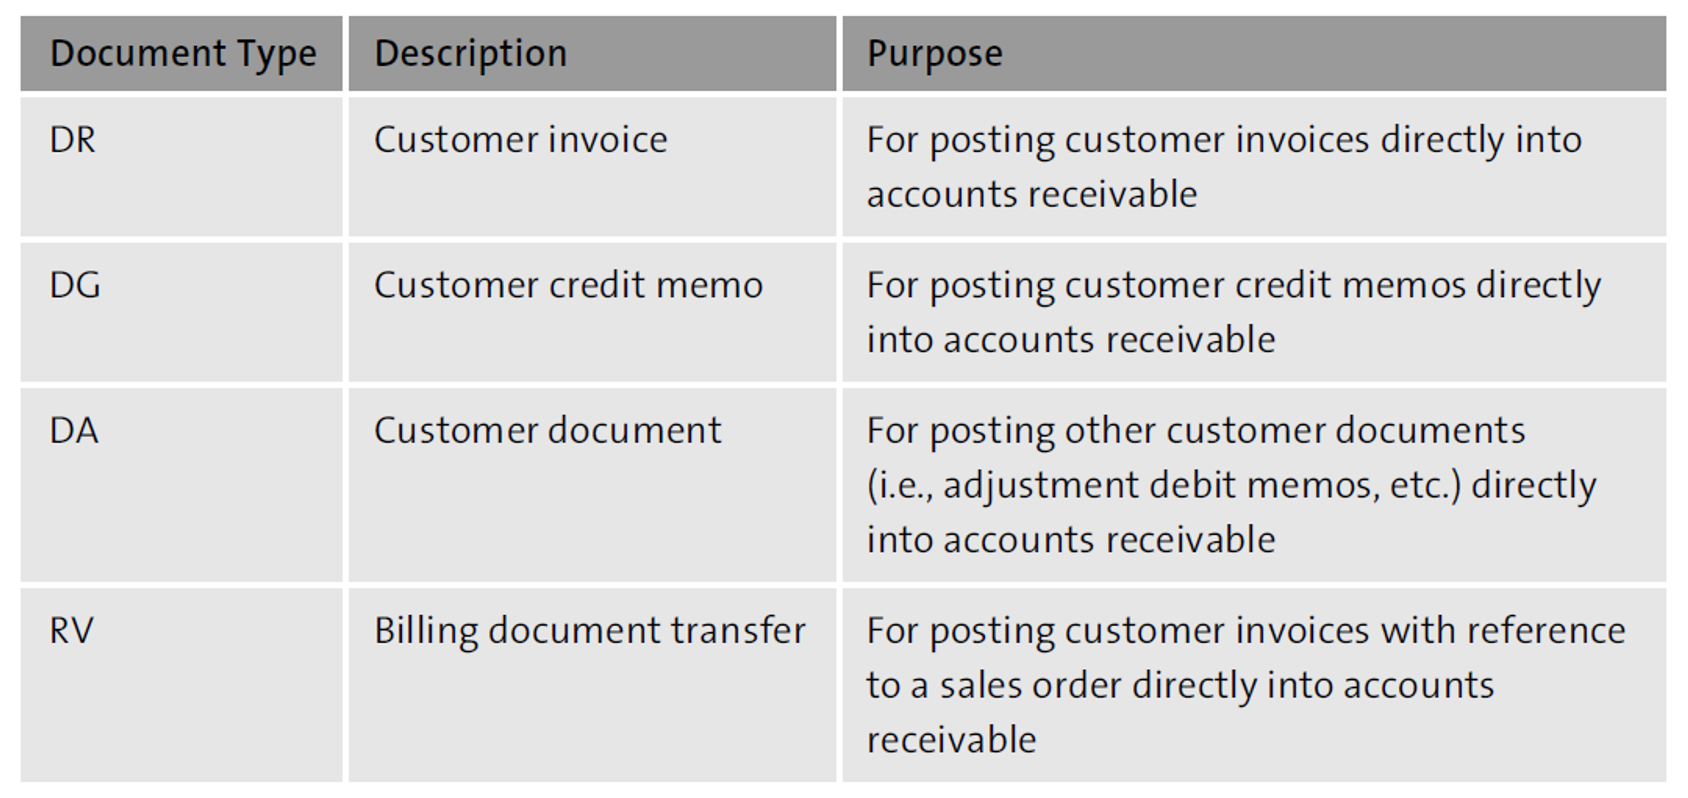 Document Types for Customer Invoices and Credit Memos